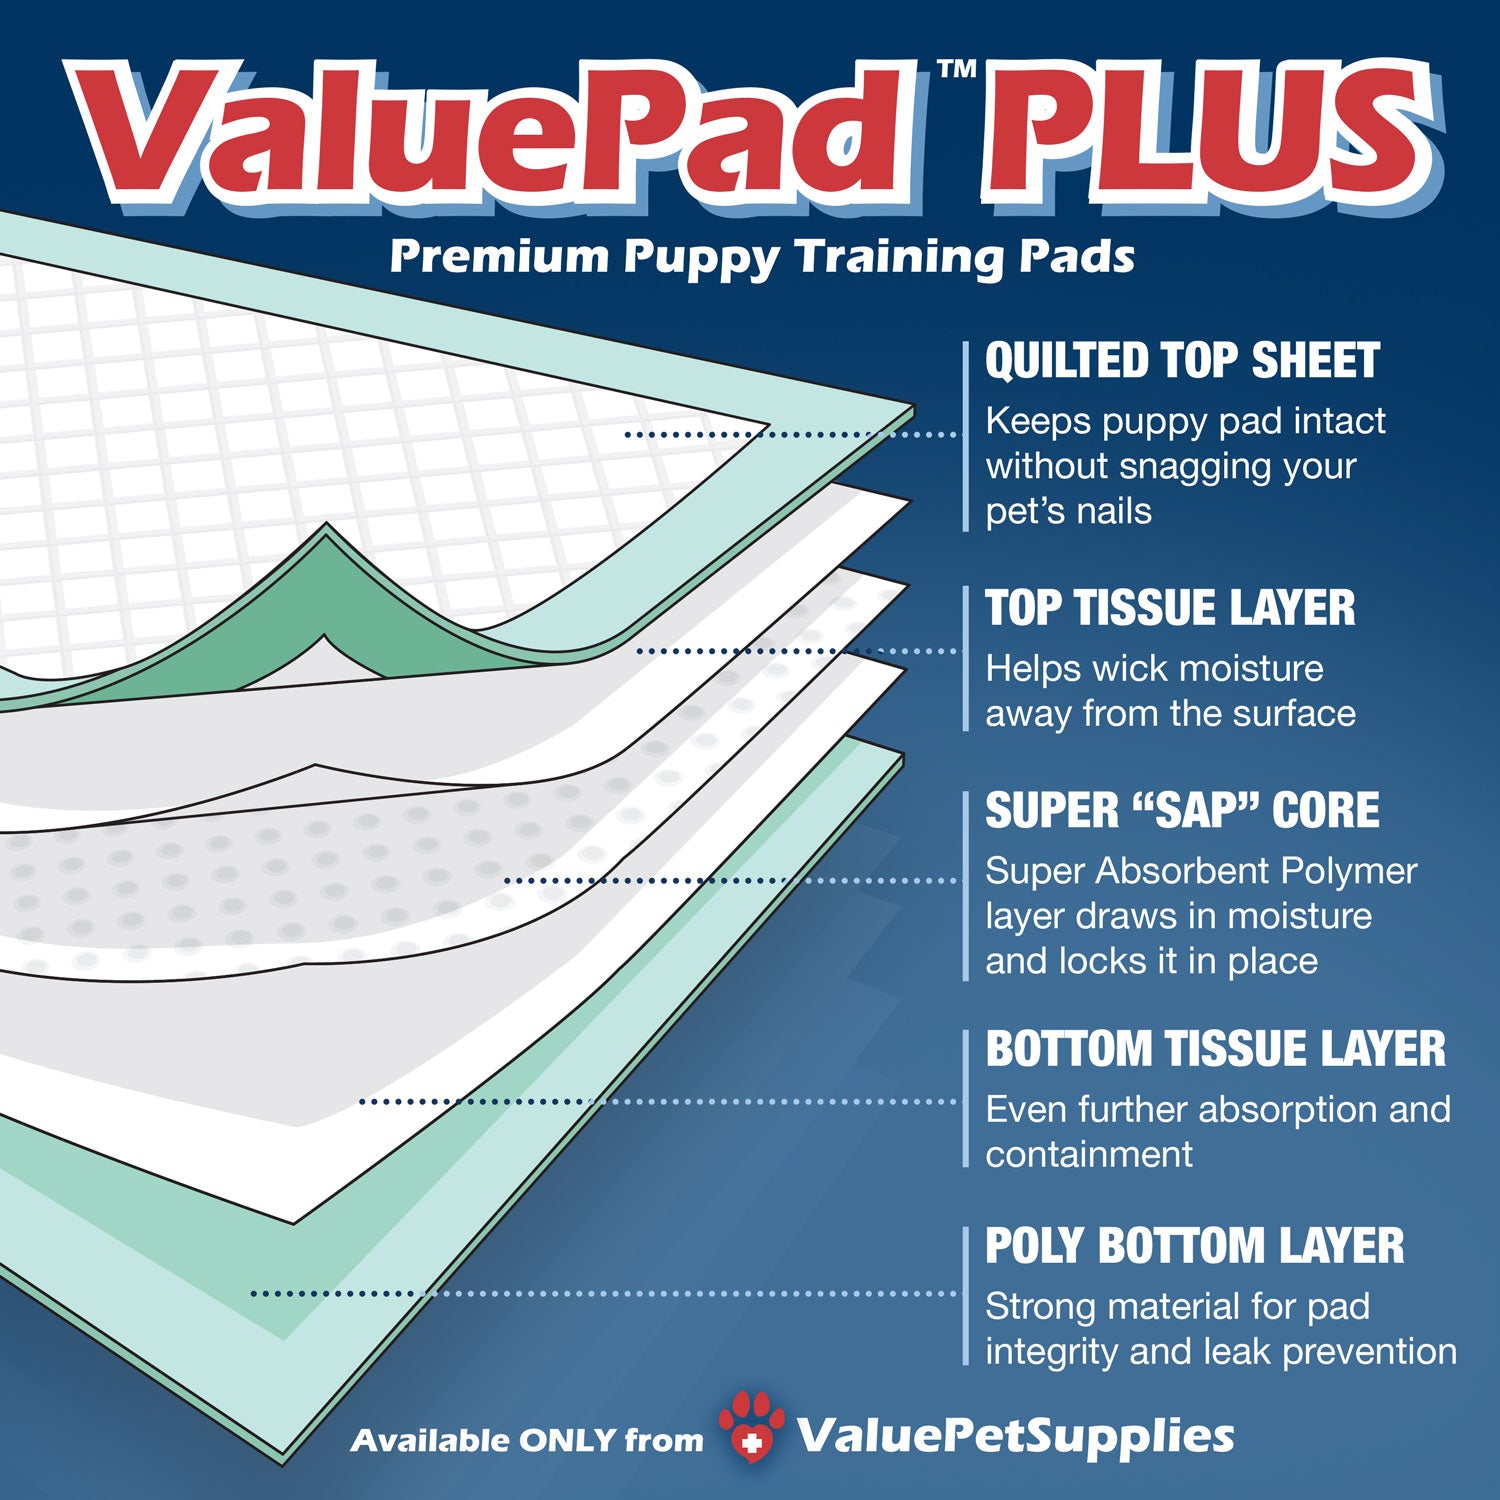 ValuePad Plus Puppy Pads, Extra Large 28x36 Inch, 50 Count